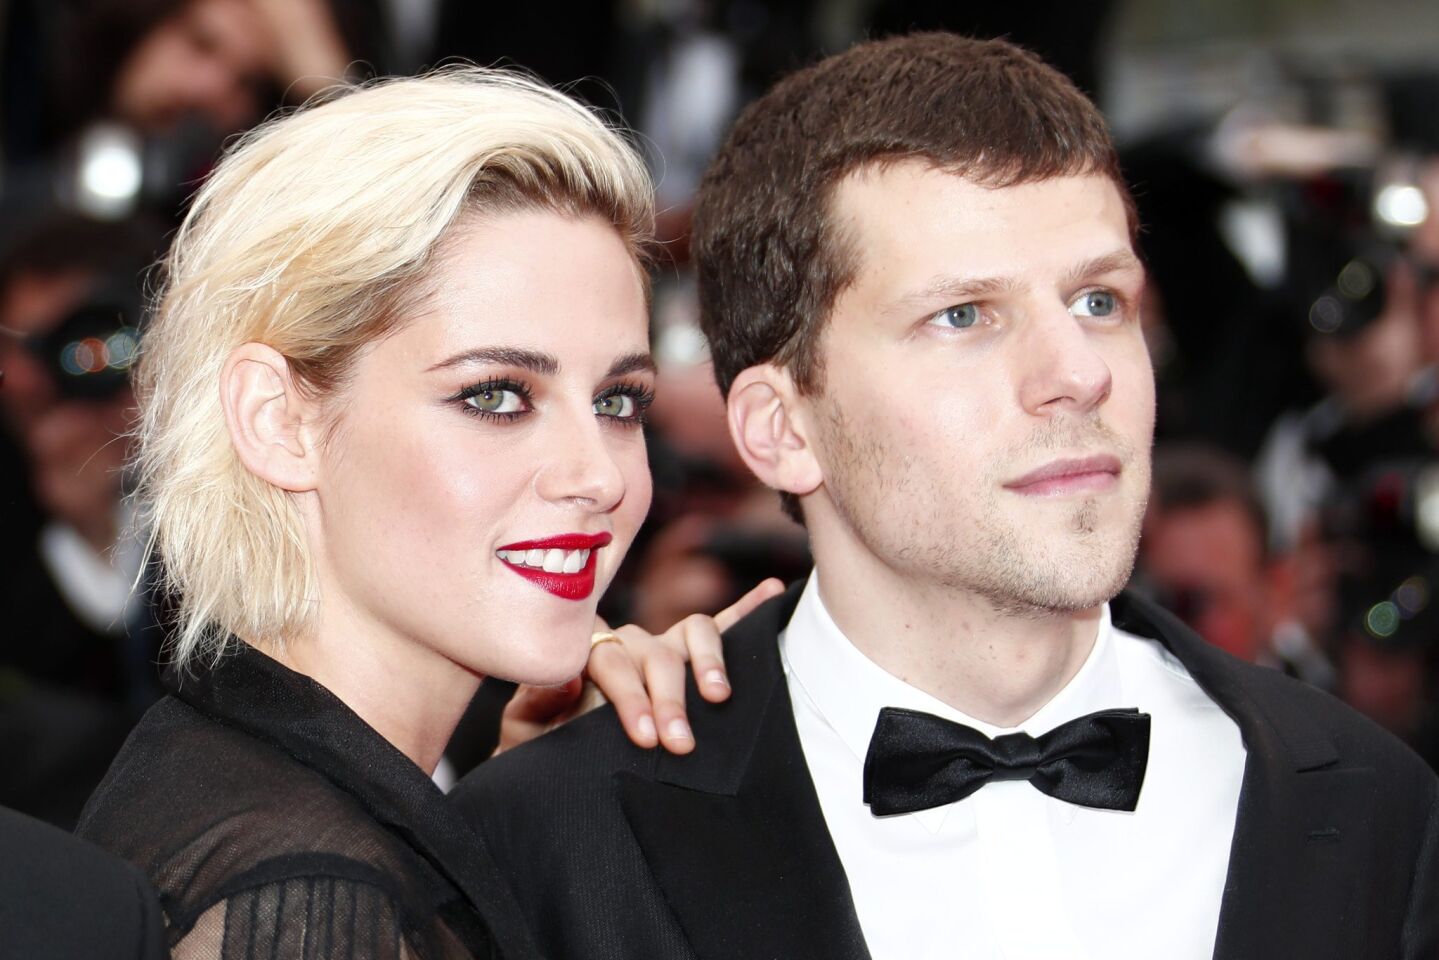 Actress Kristen Stewart and actor Jesse Eisenberg arrive for the screening of "Cafe Society" and the opening ceremony of the 2016 Cannes Film Festival on Wednesday.